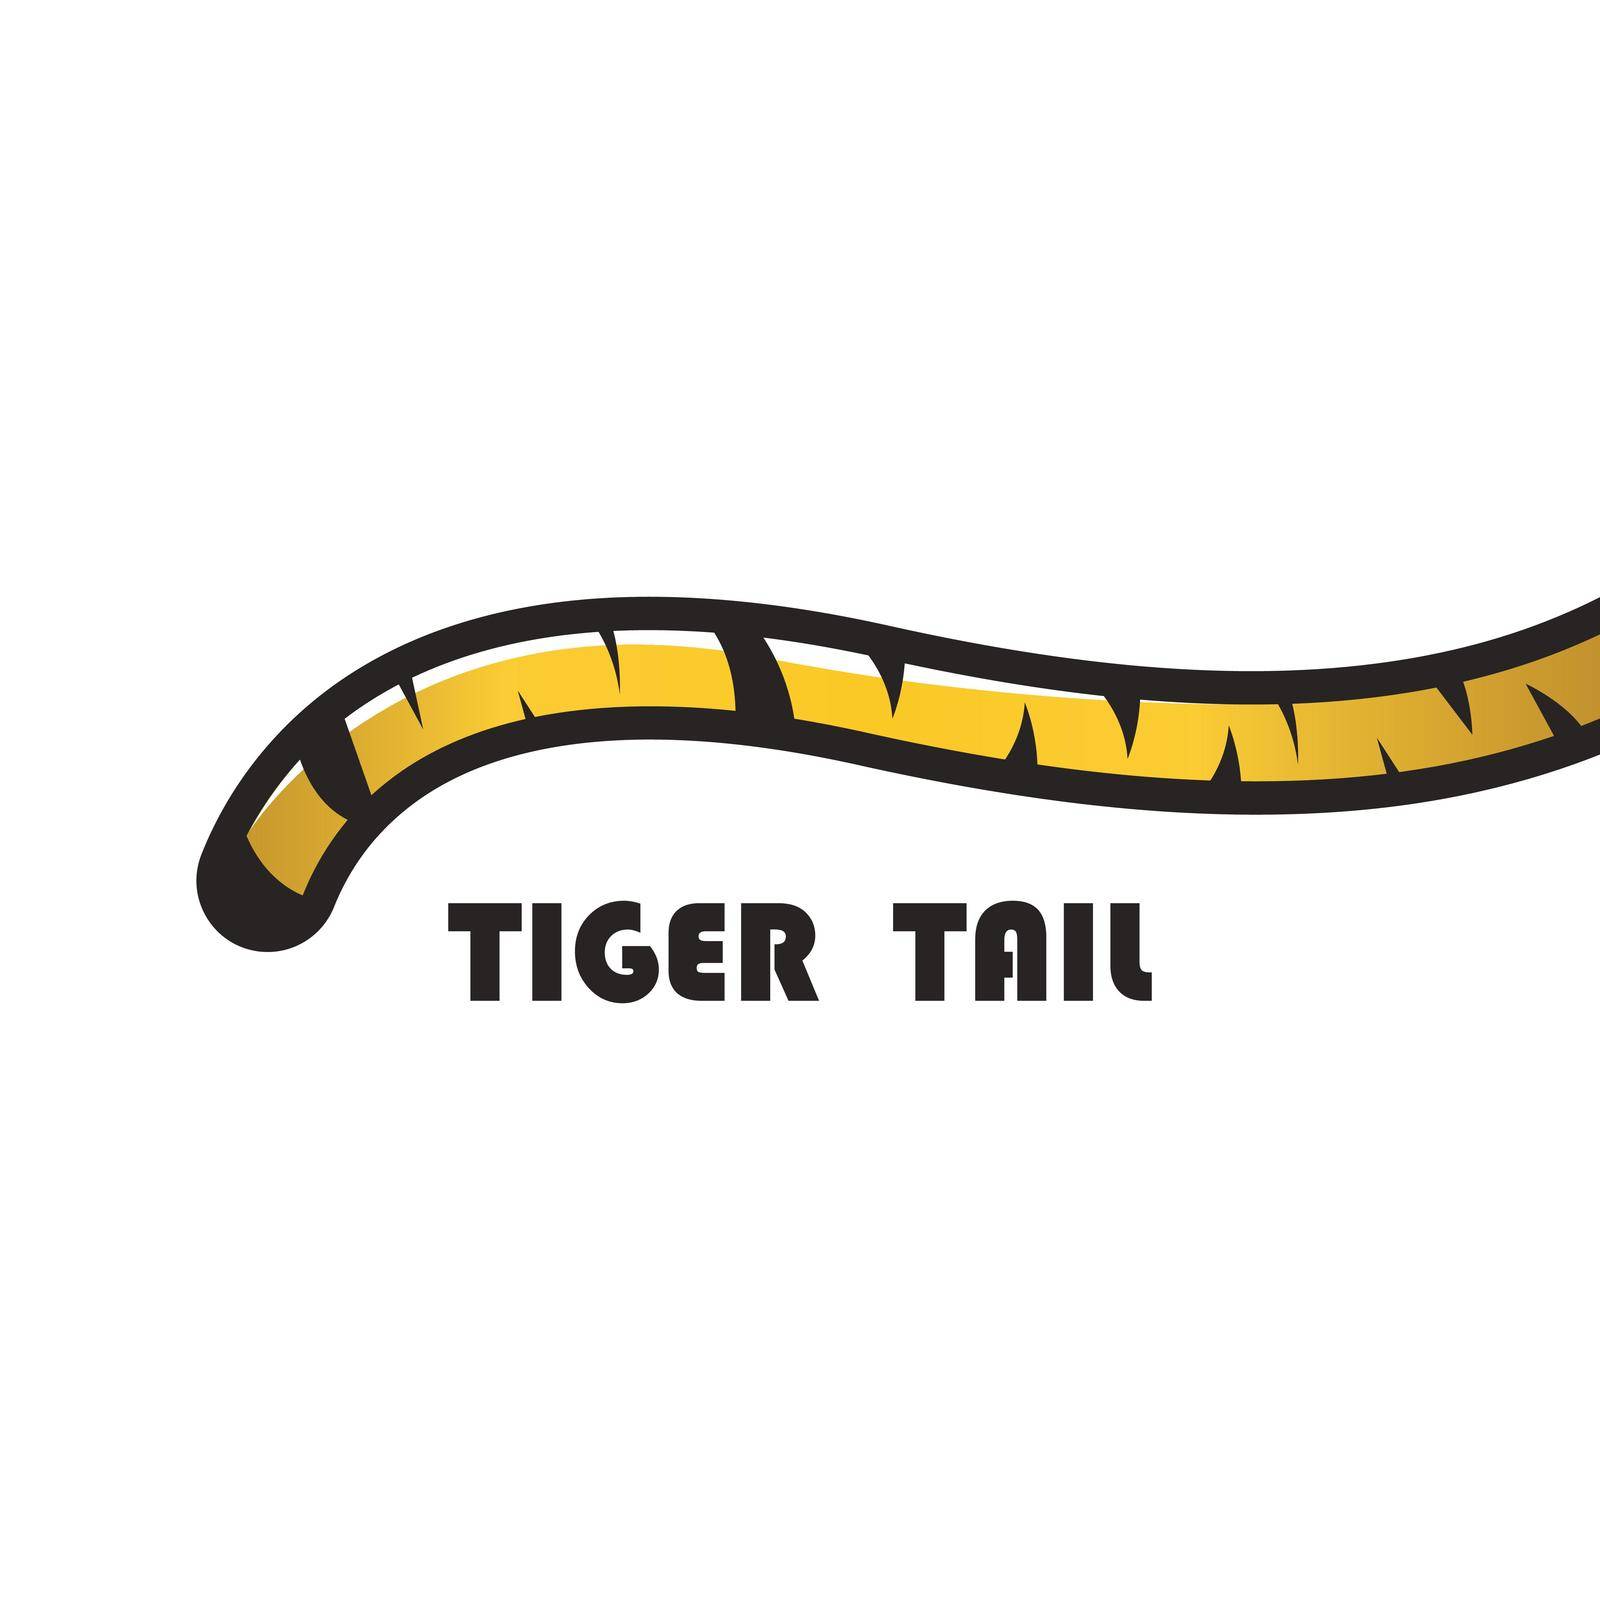 Tiger tail icon  by rnking